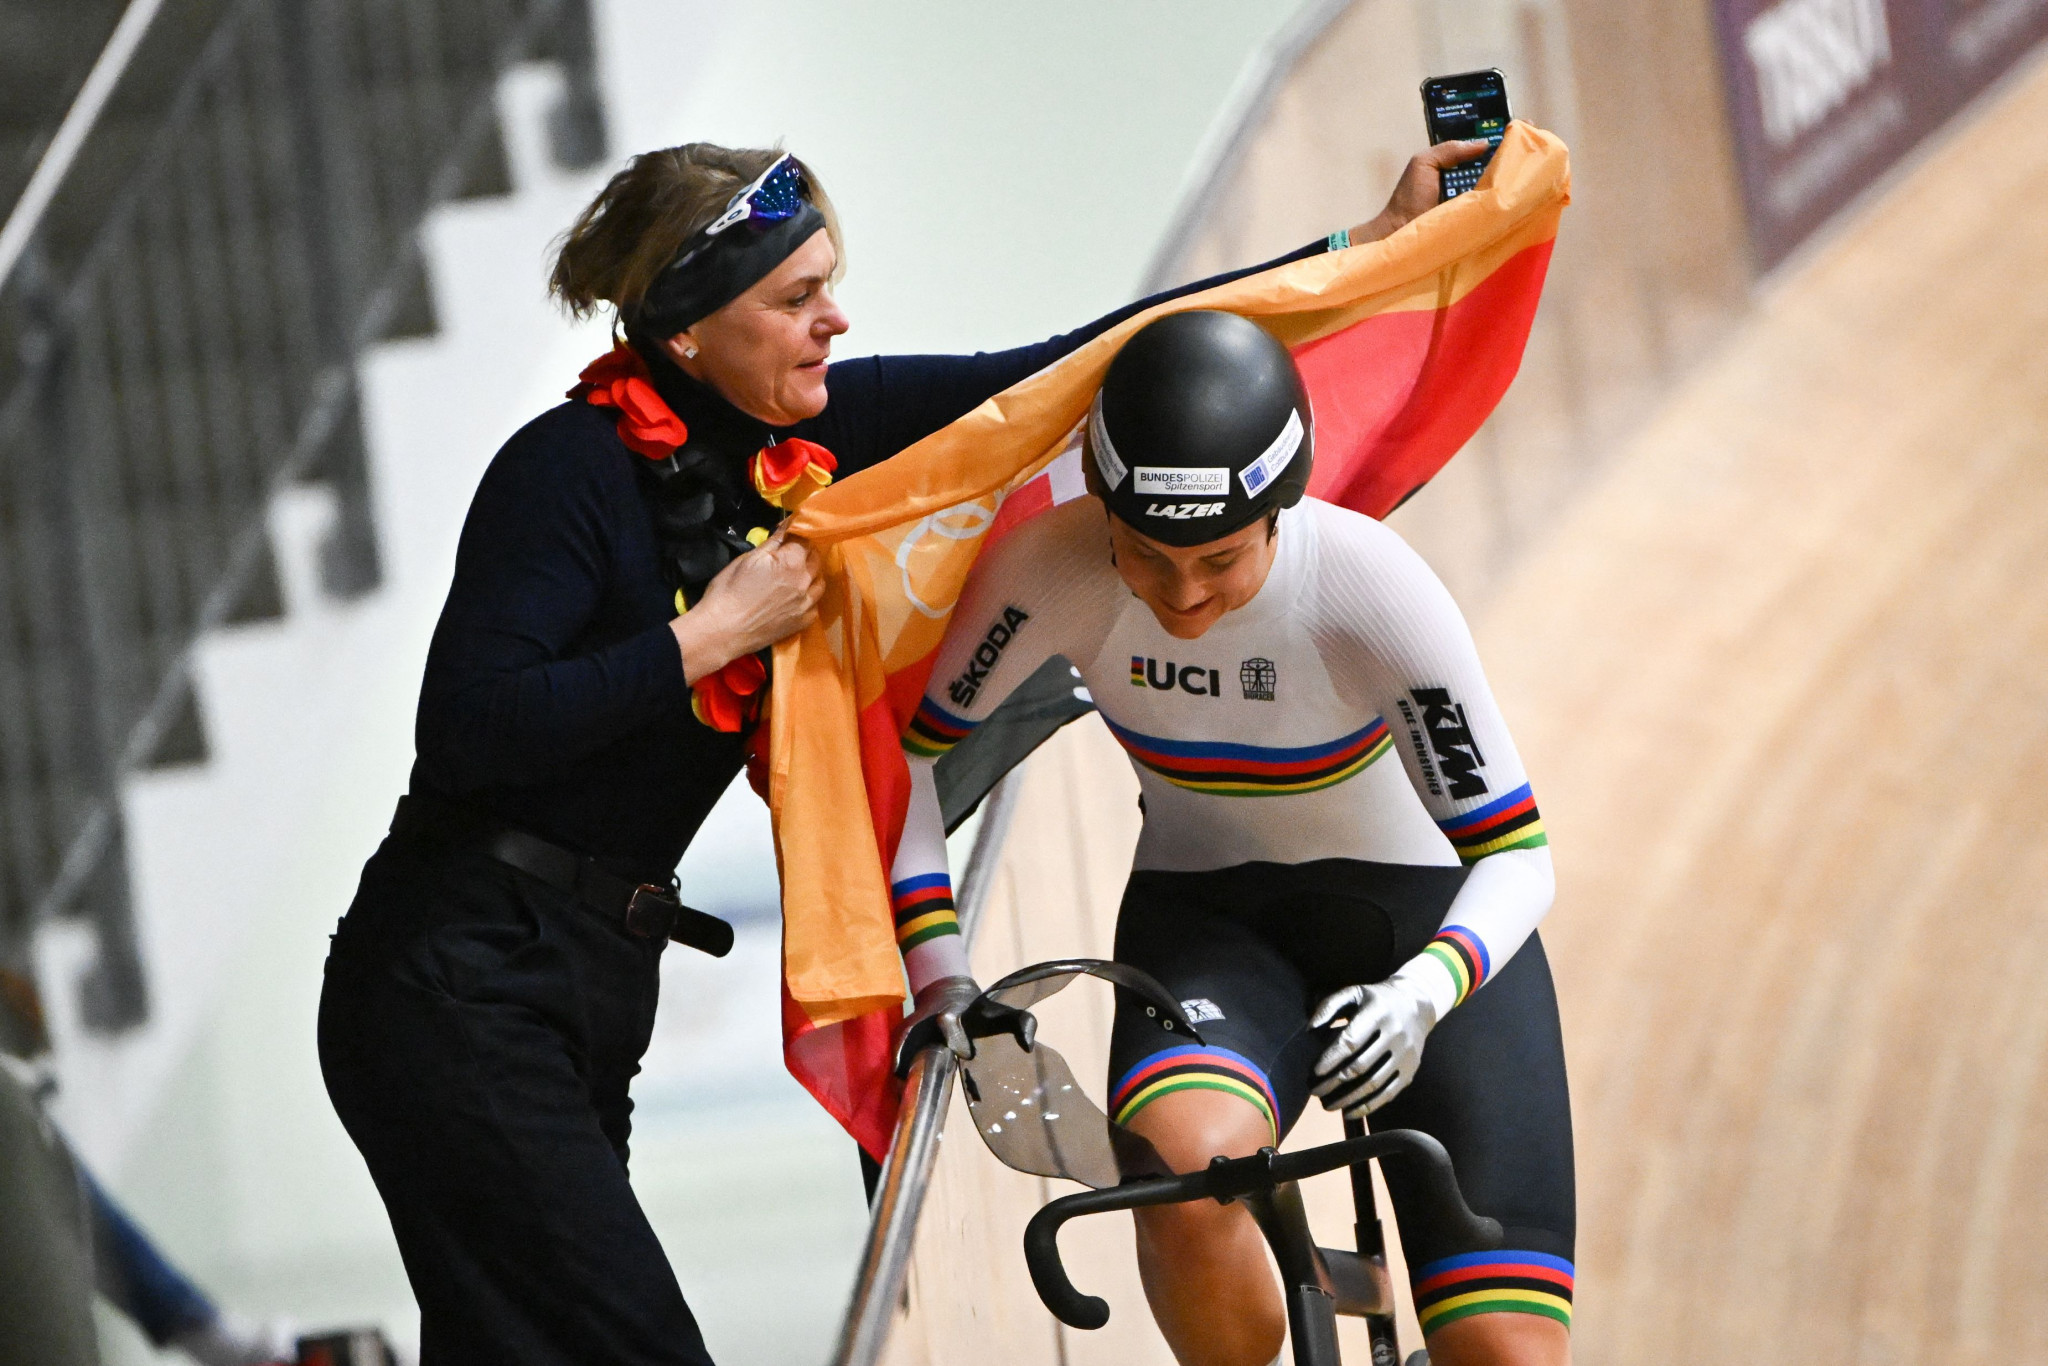 Friedrich wins another Track European Championships keirin gold to help Germany top medals table